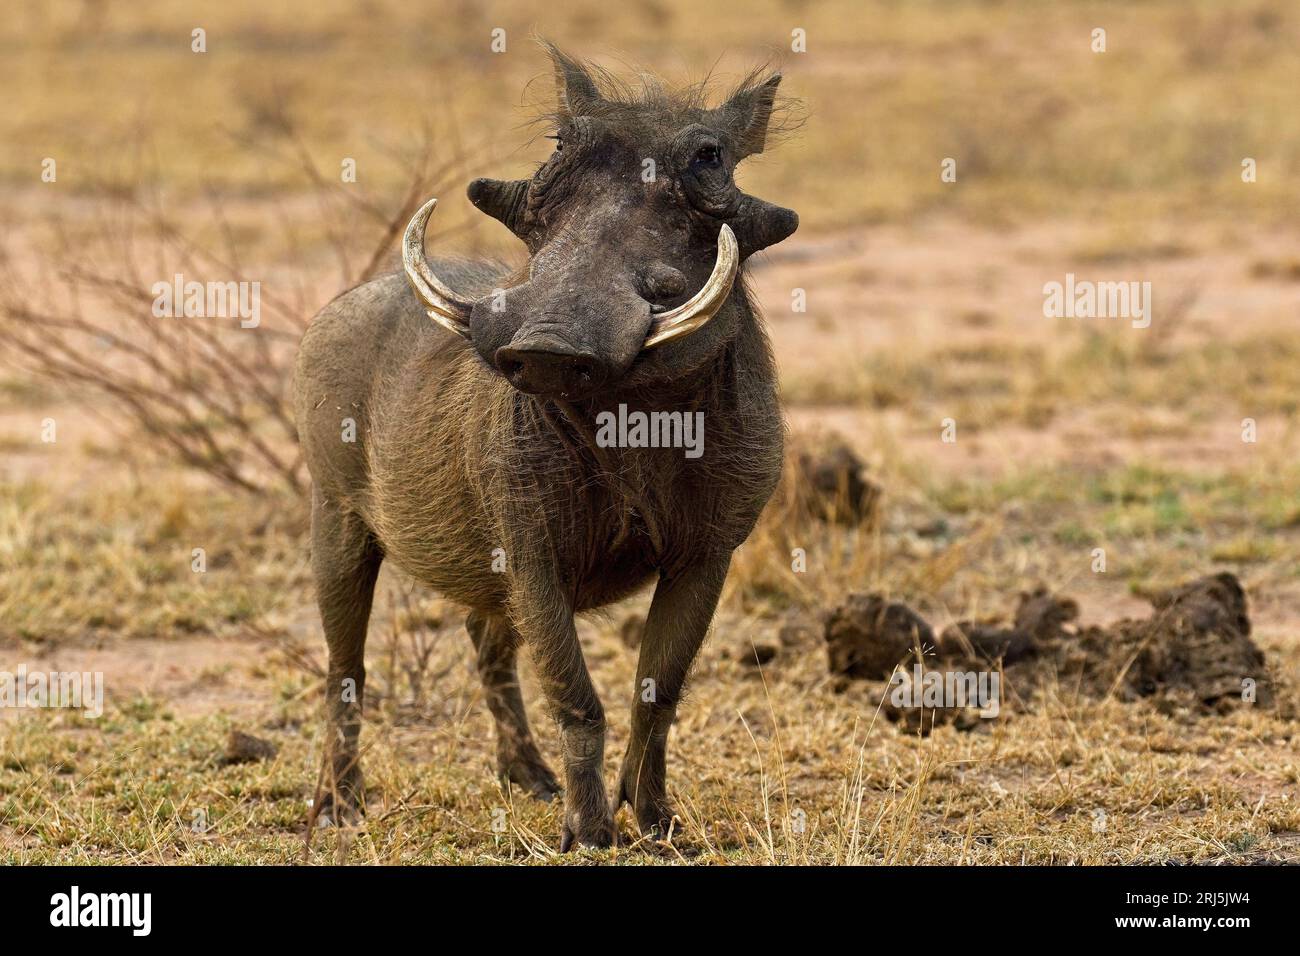 A warthog stands in a lush, green grassy field Stock Photo